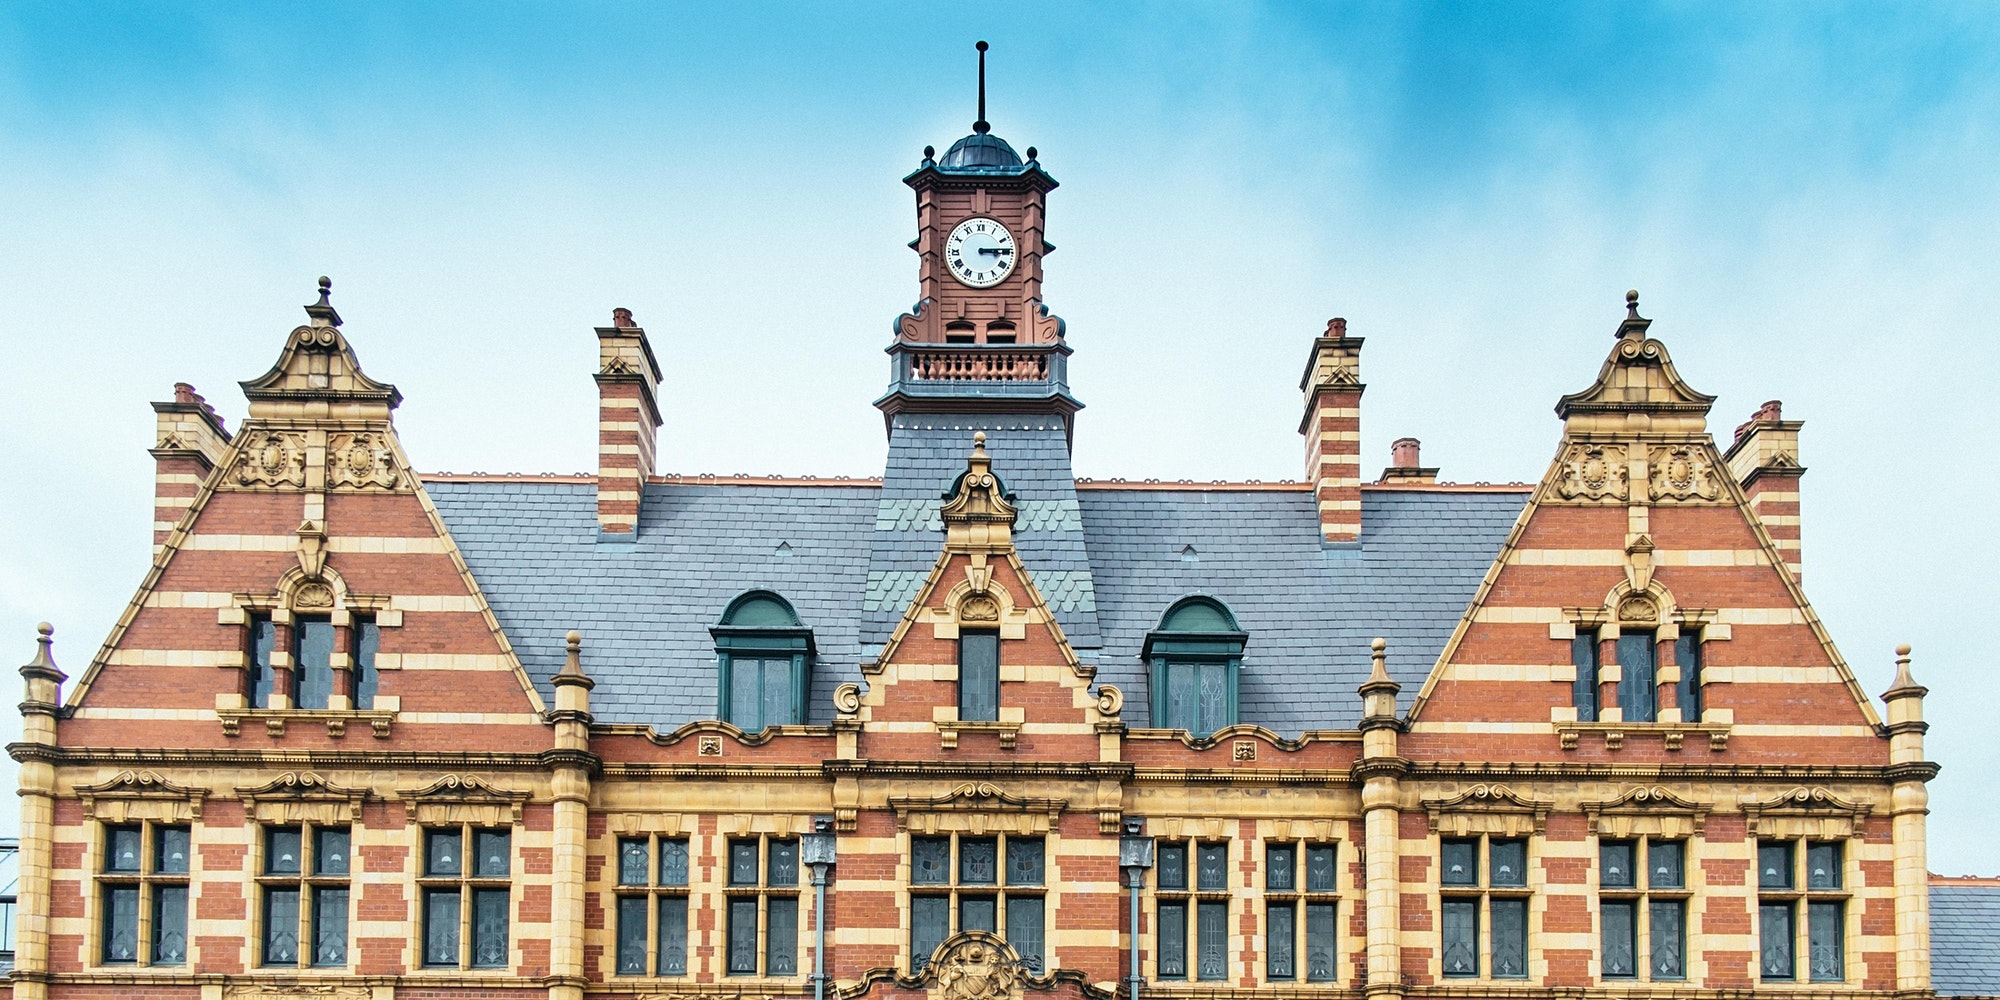 Exterior image of Victoria Baths from Hathersage Road